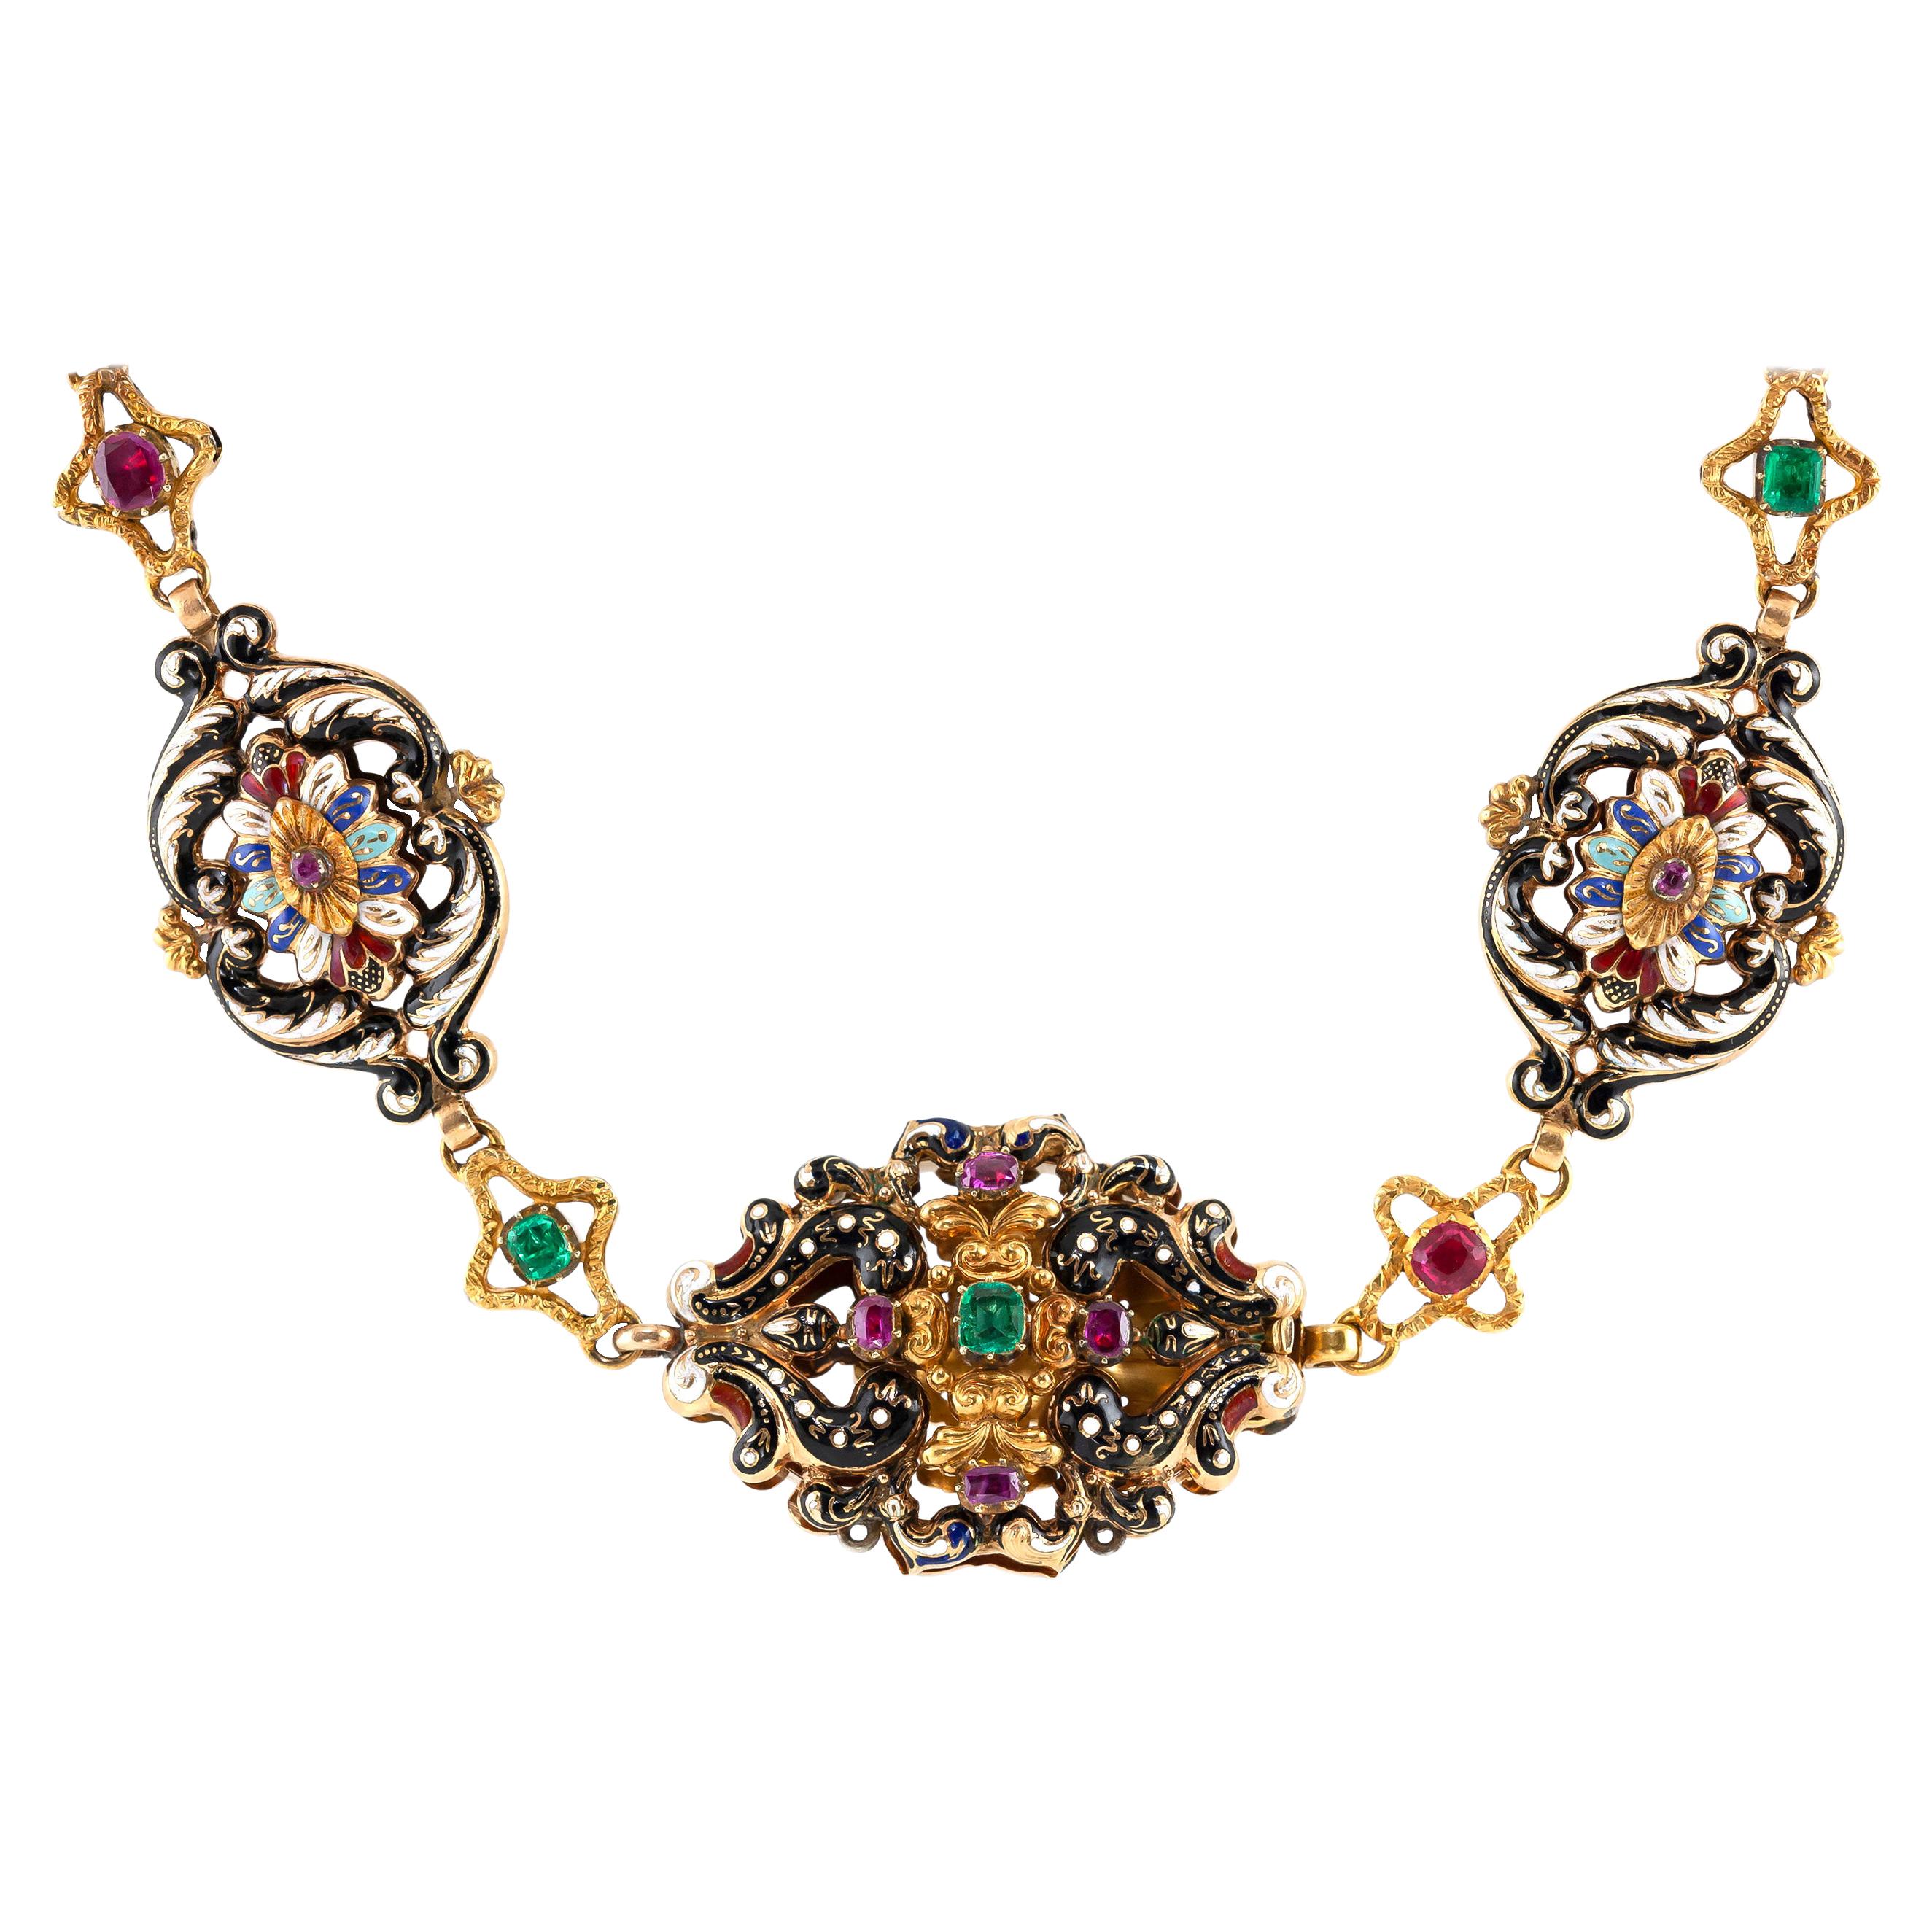 1890s Necklace with Colorful Stones and Enamel